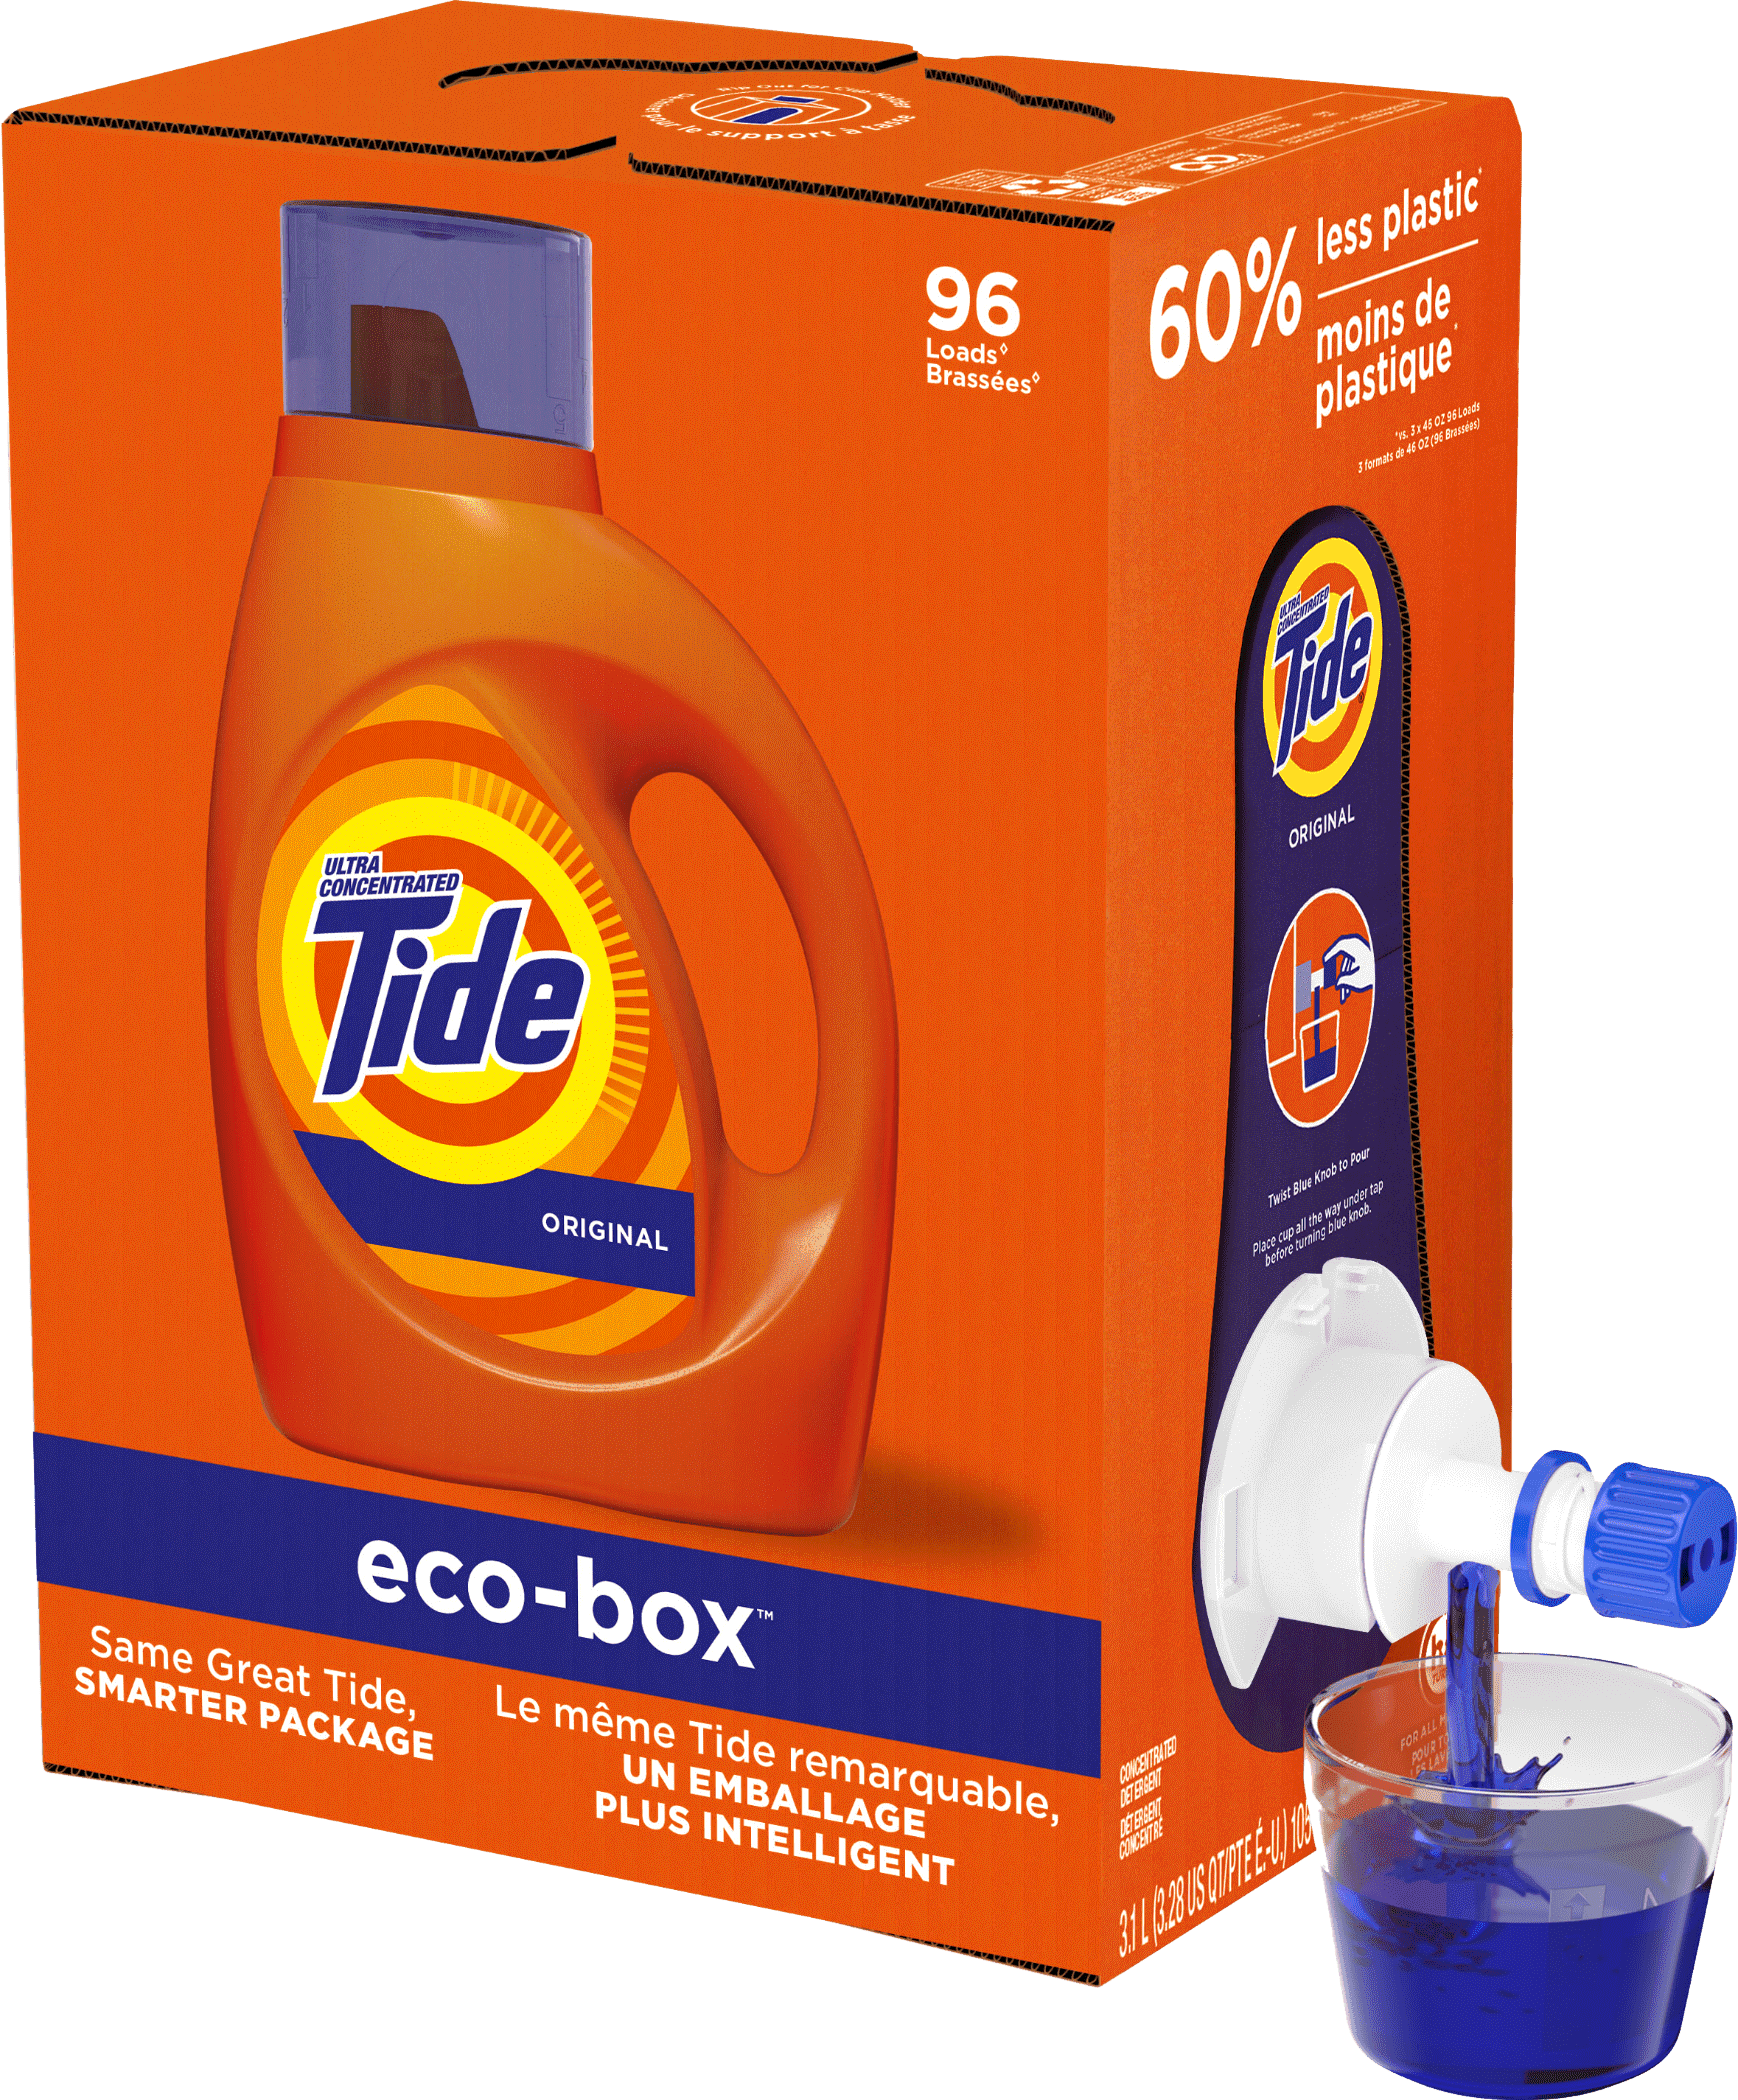 PG added the Eco-Box to its range of laundry detergents.